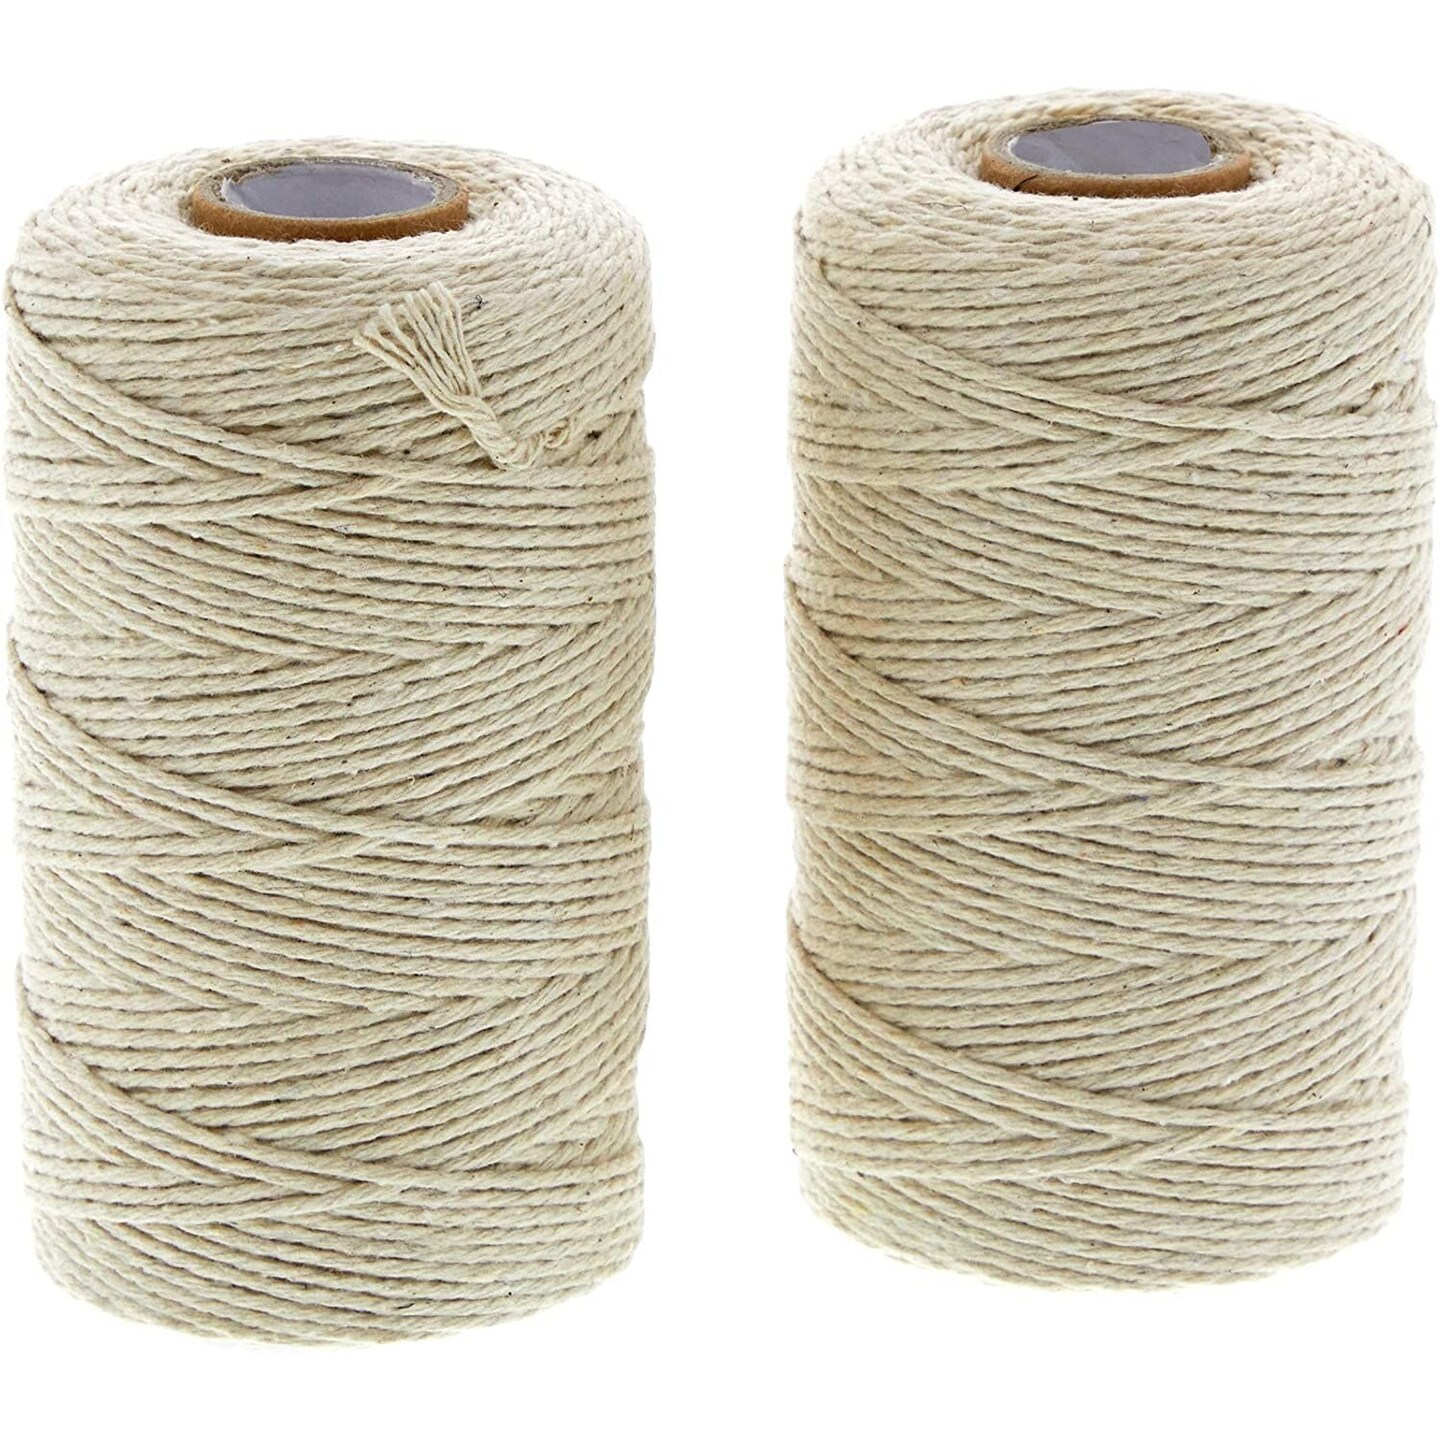 Uses for Twine Rope  What Is Twine Made Of, Types Of Twine